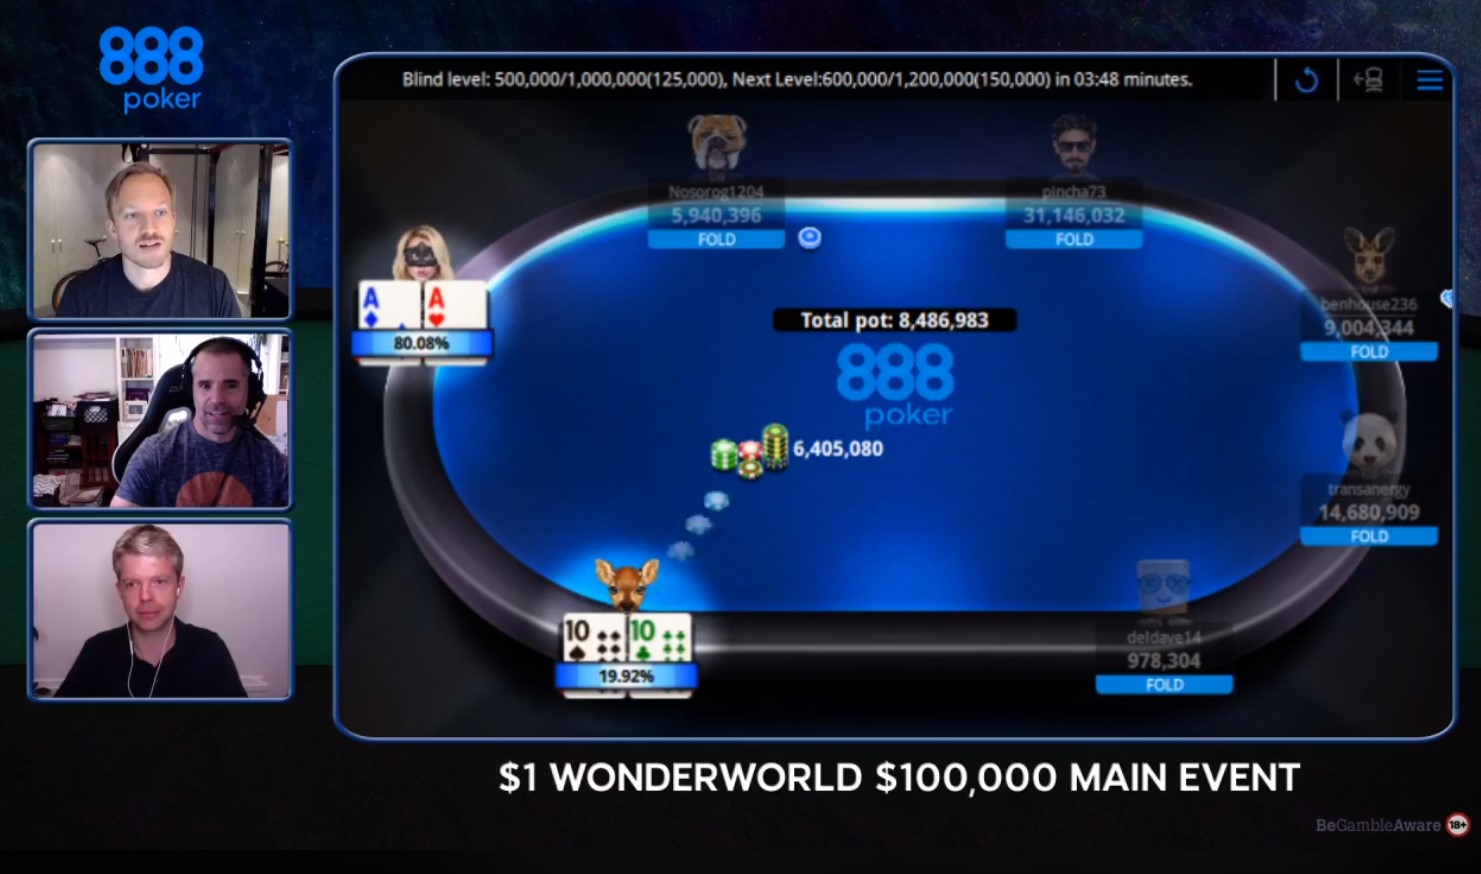 David Tuchman and Nick Wealthall on commentary, and at the final table with 888poker Ambassador Martin Jacobson.